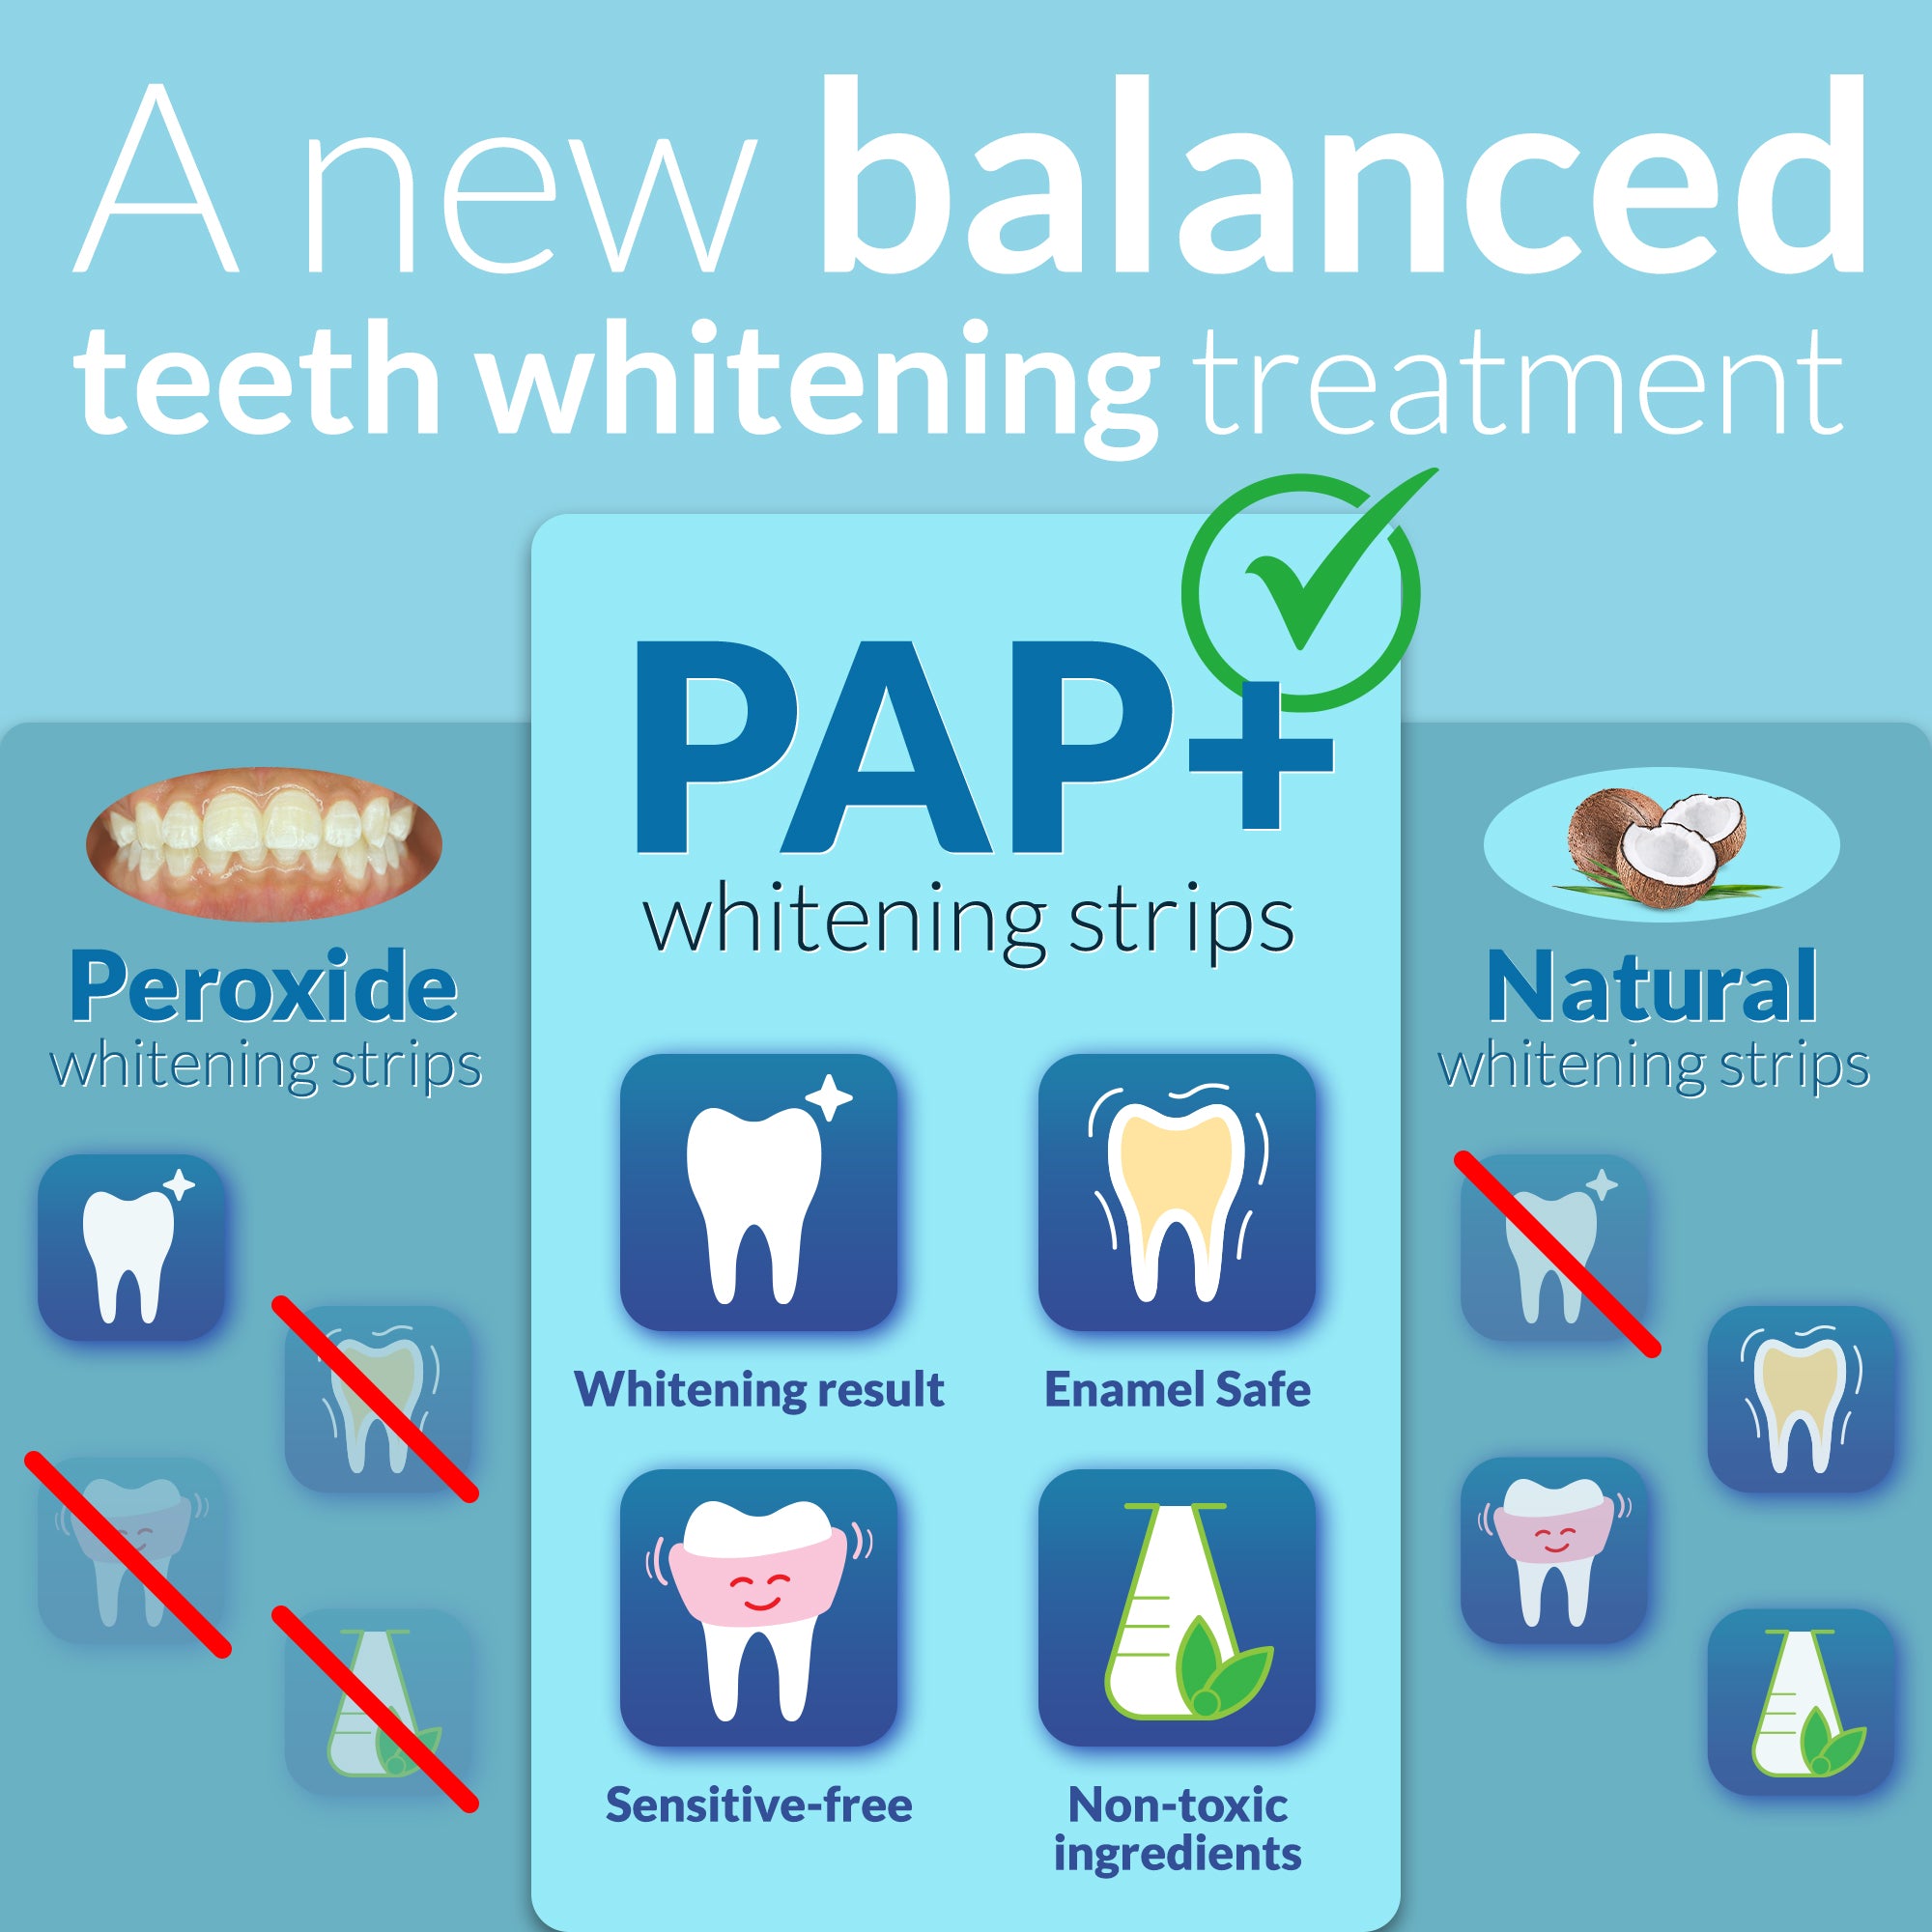 Dentist Formulated PAP+ Teeth Whitening Strips, 21 Treatments (42 Strips)